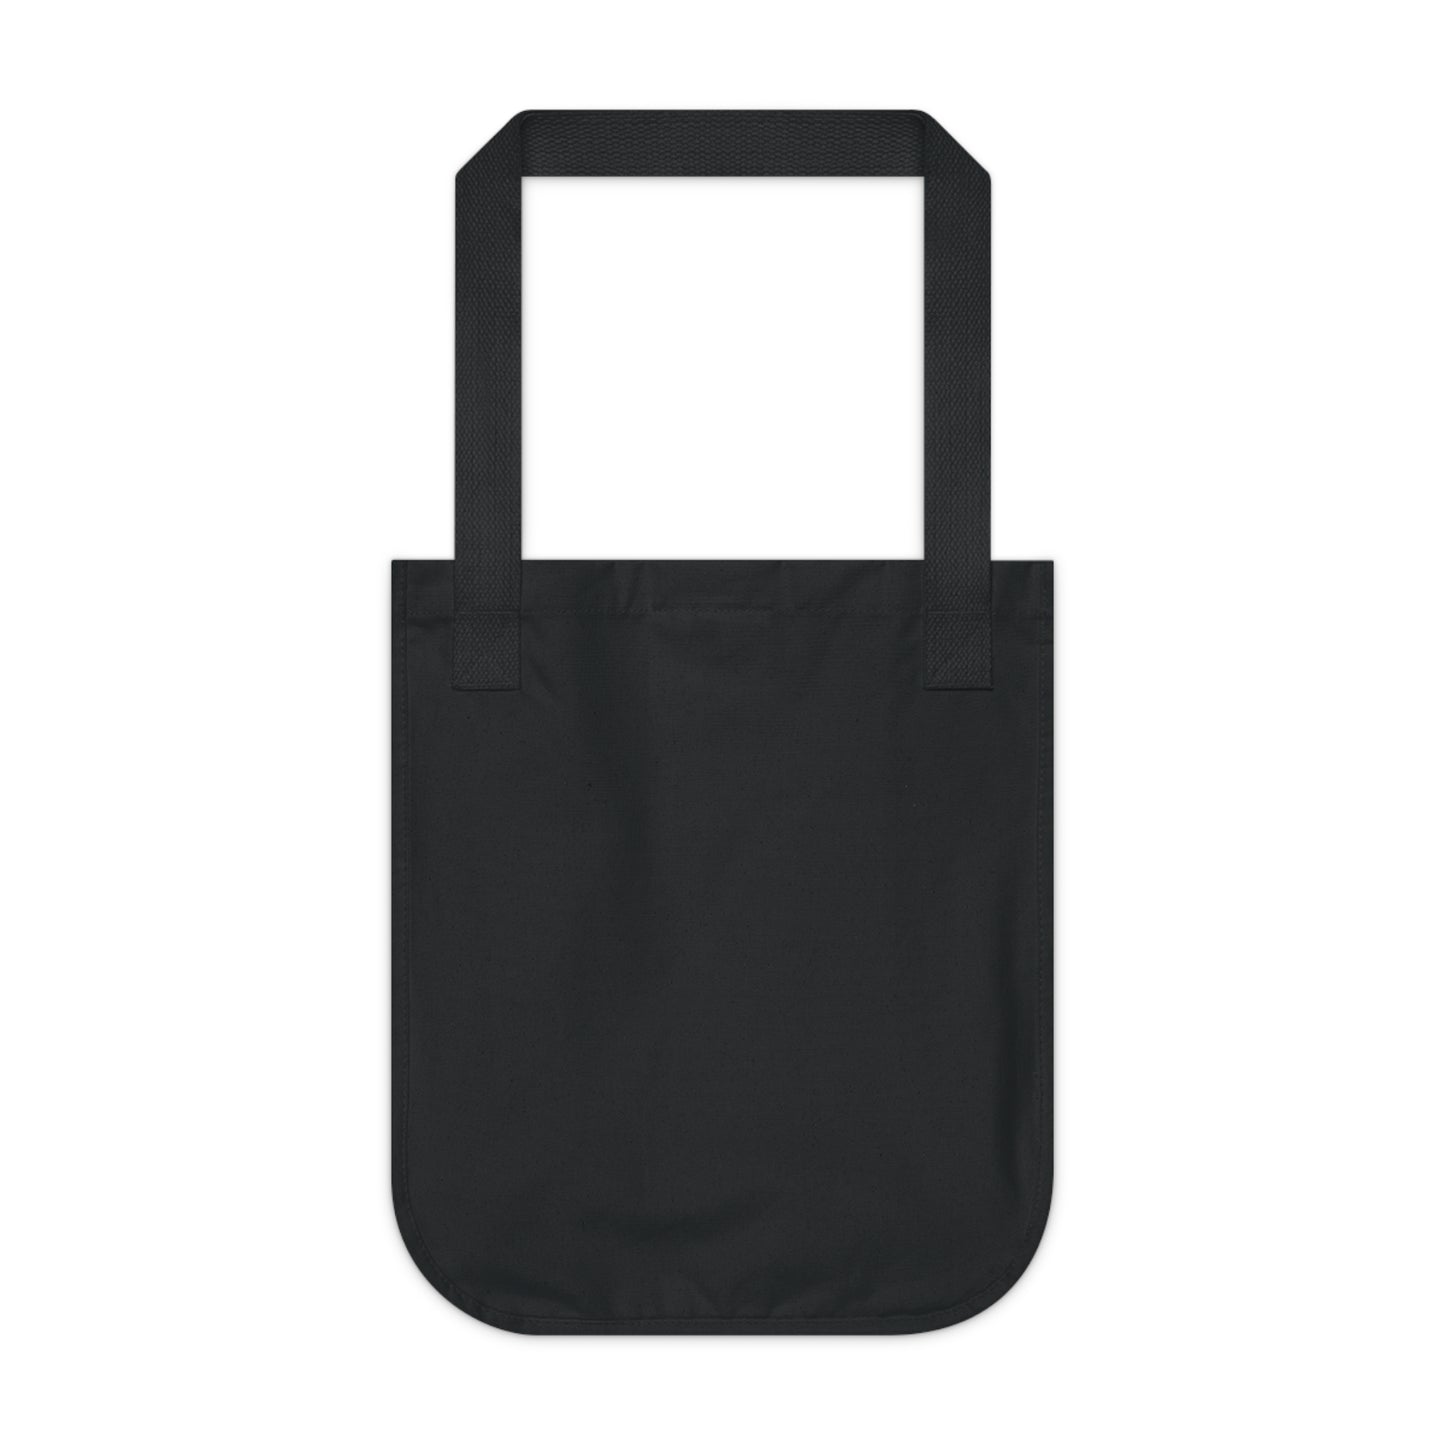 "Nature's Majesty: An Artistic Expression of the Natural World" - Bam Boo! Lifestyle Eco-friendly Tote Bag